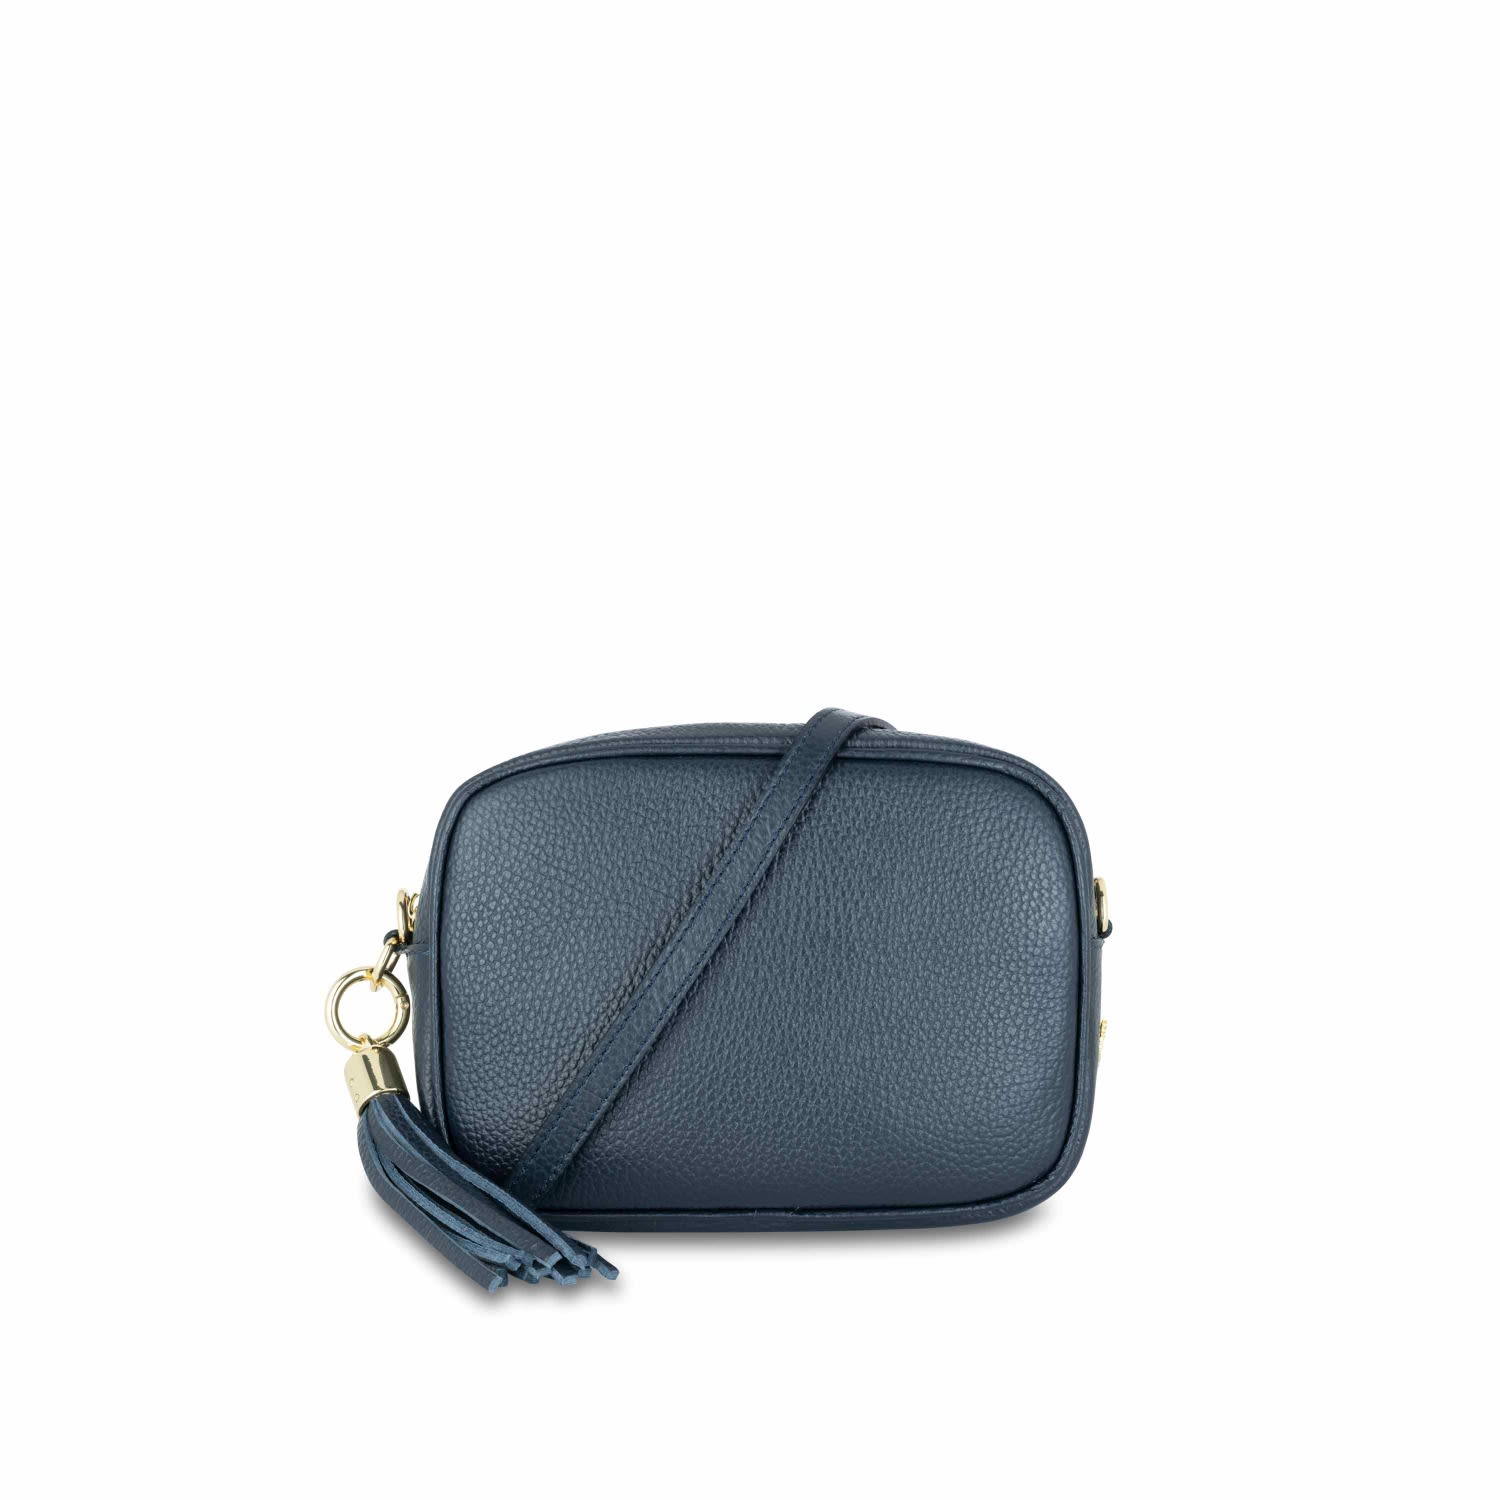 Apatchy London Women's Blue The Tassel Navy Leather Crossbody Bag